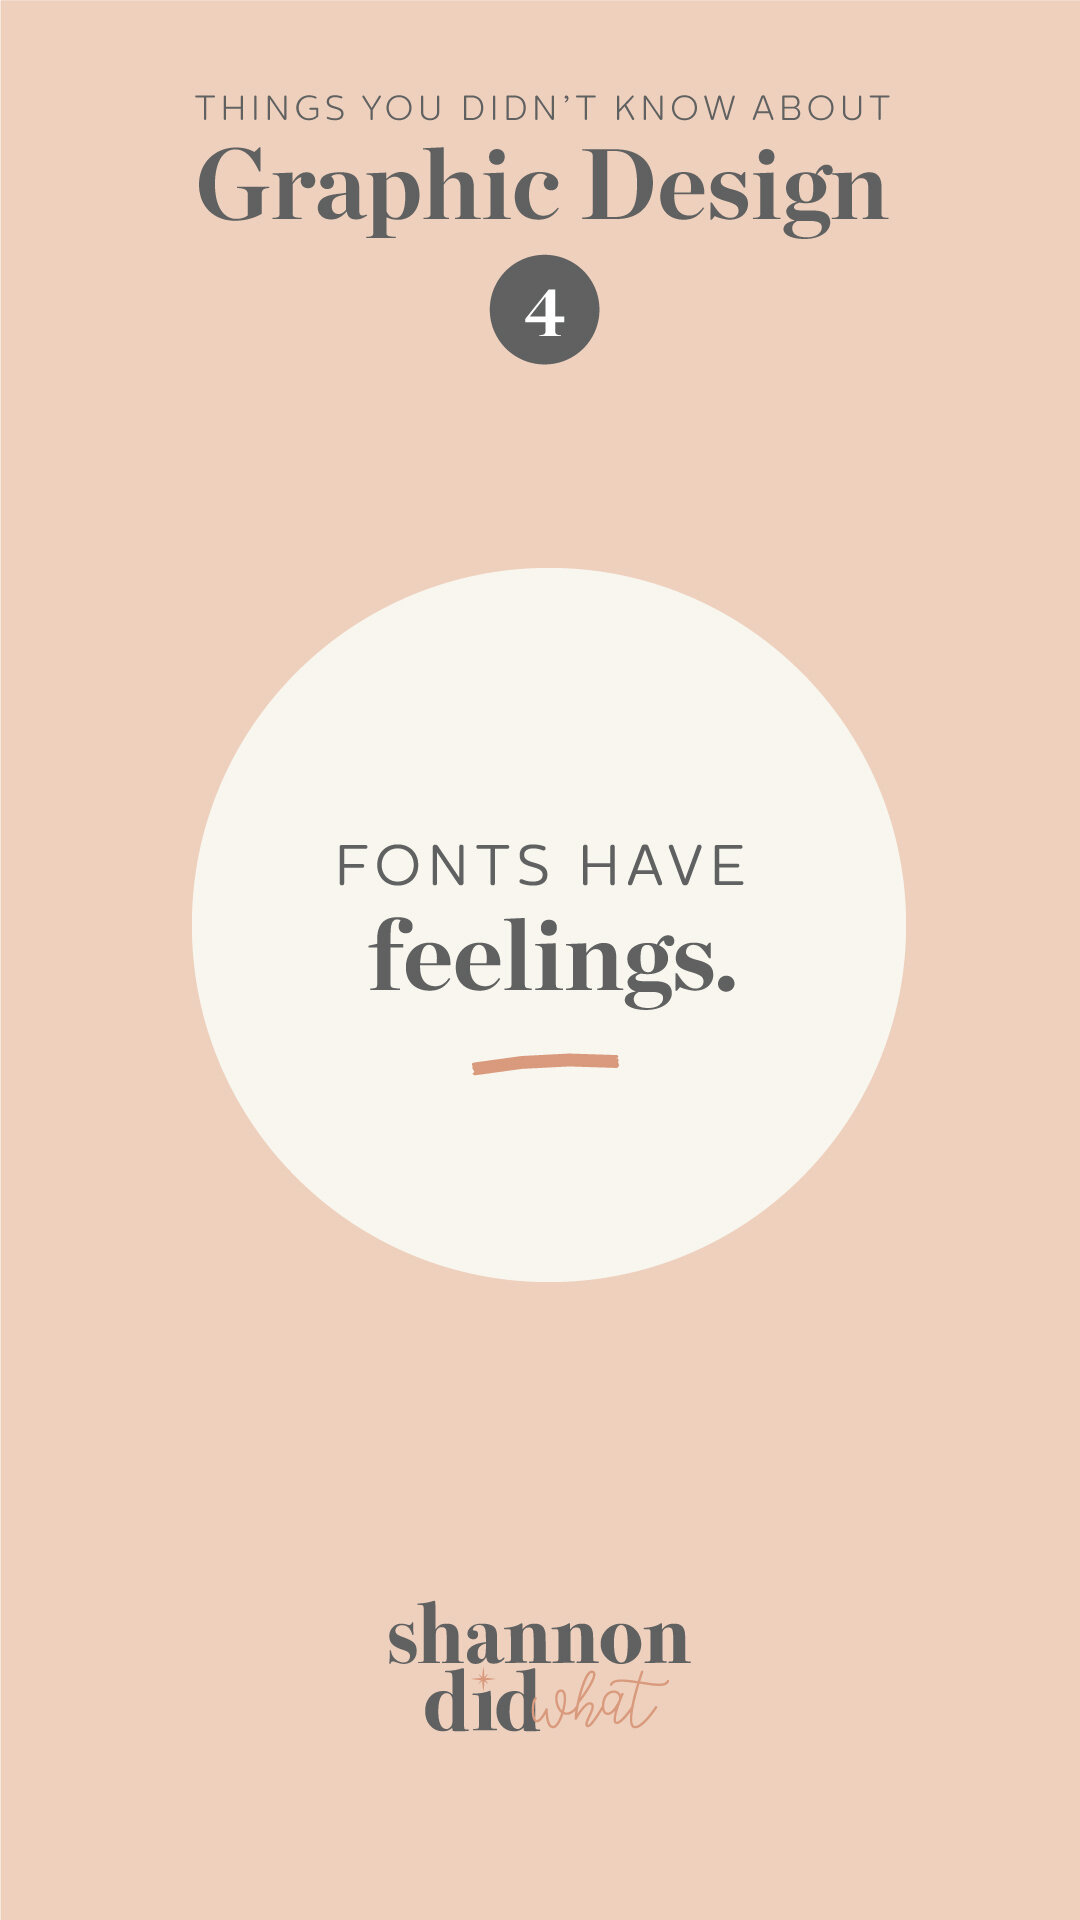 Things you didnt know about Graphic Design  - Fonts have feelings (Copy) (Copy)